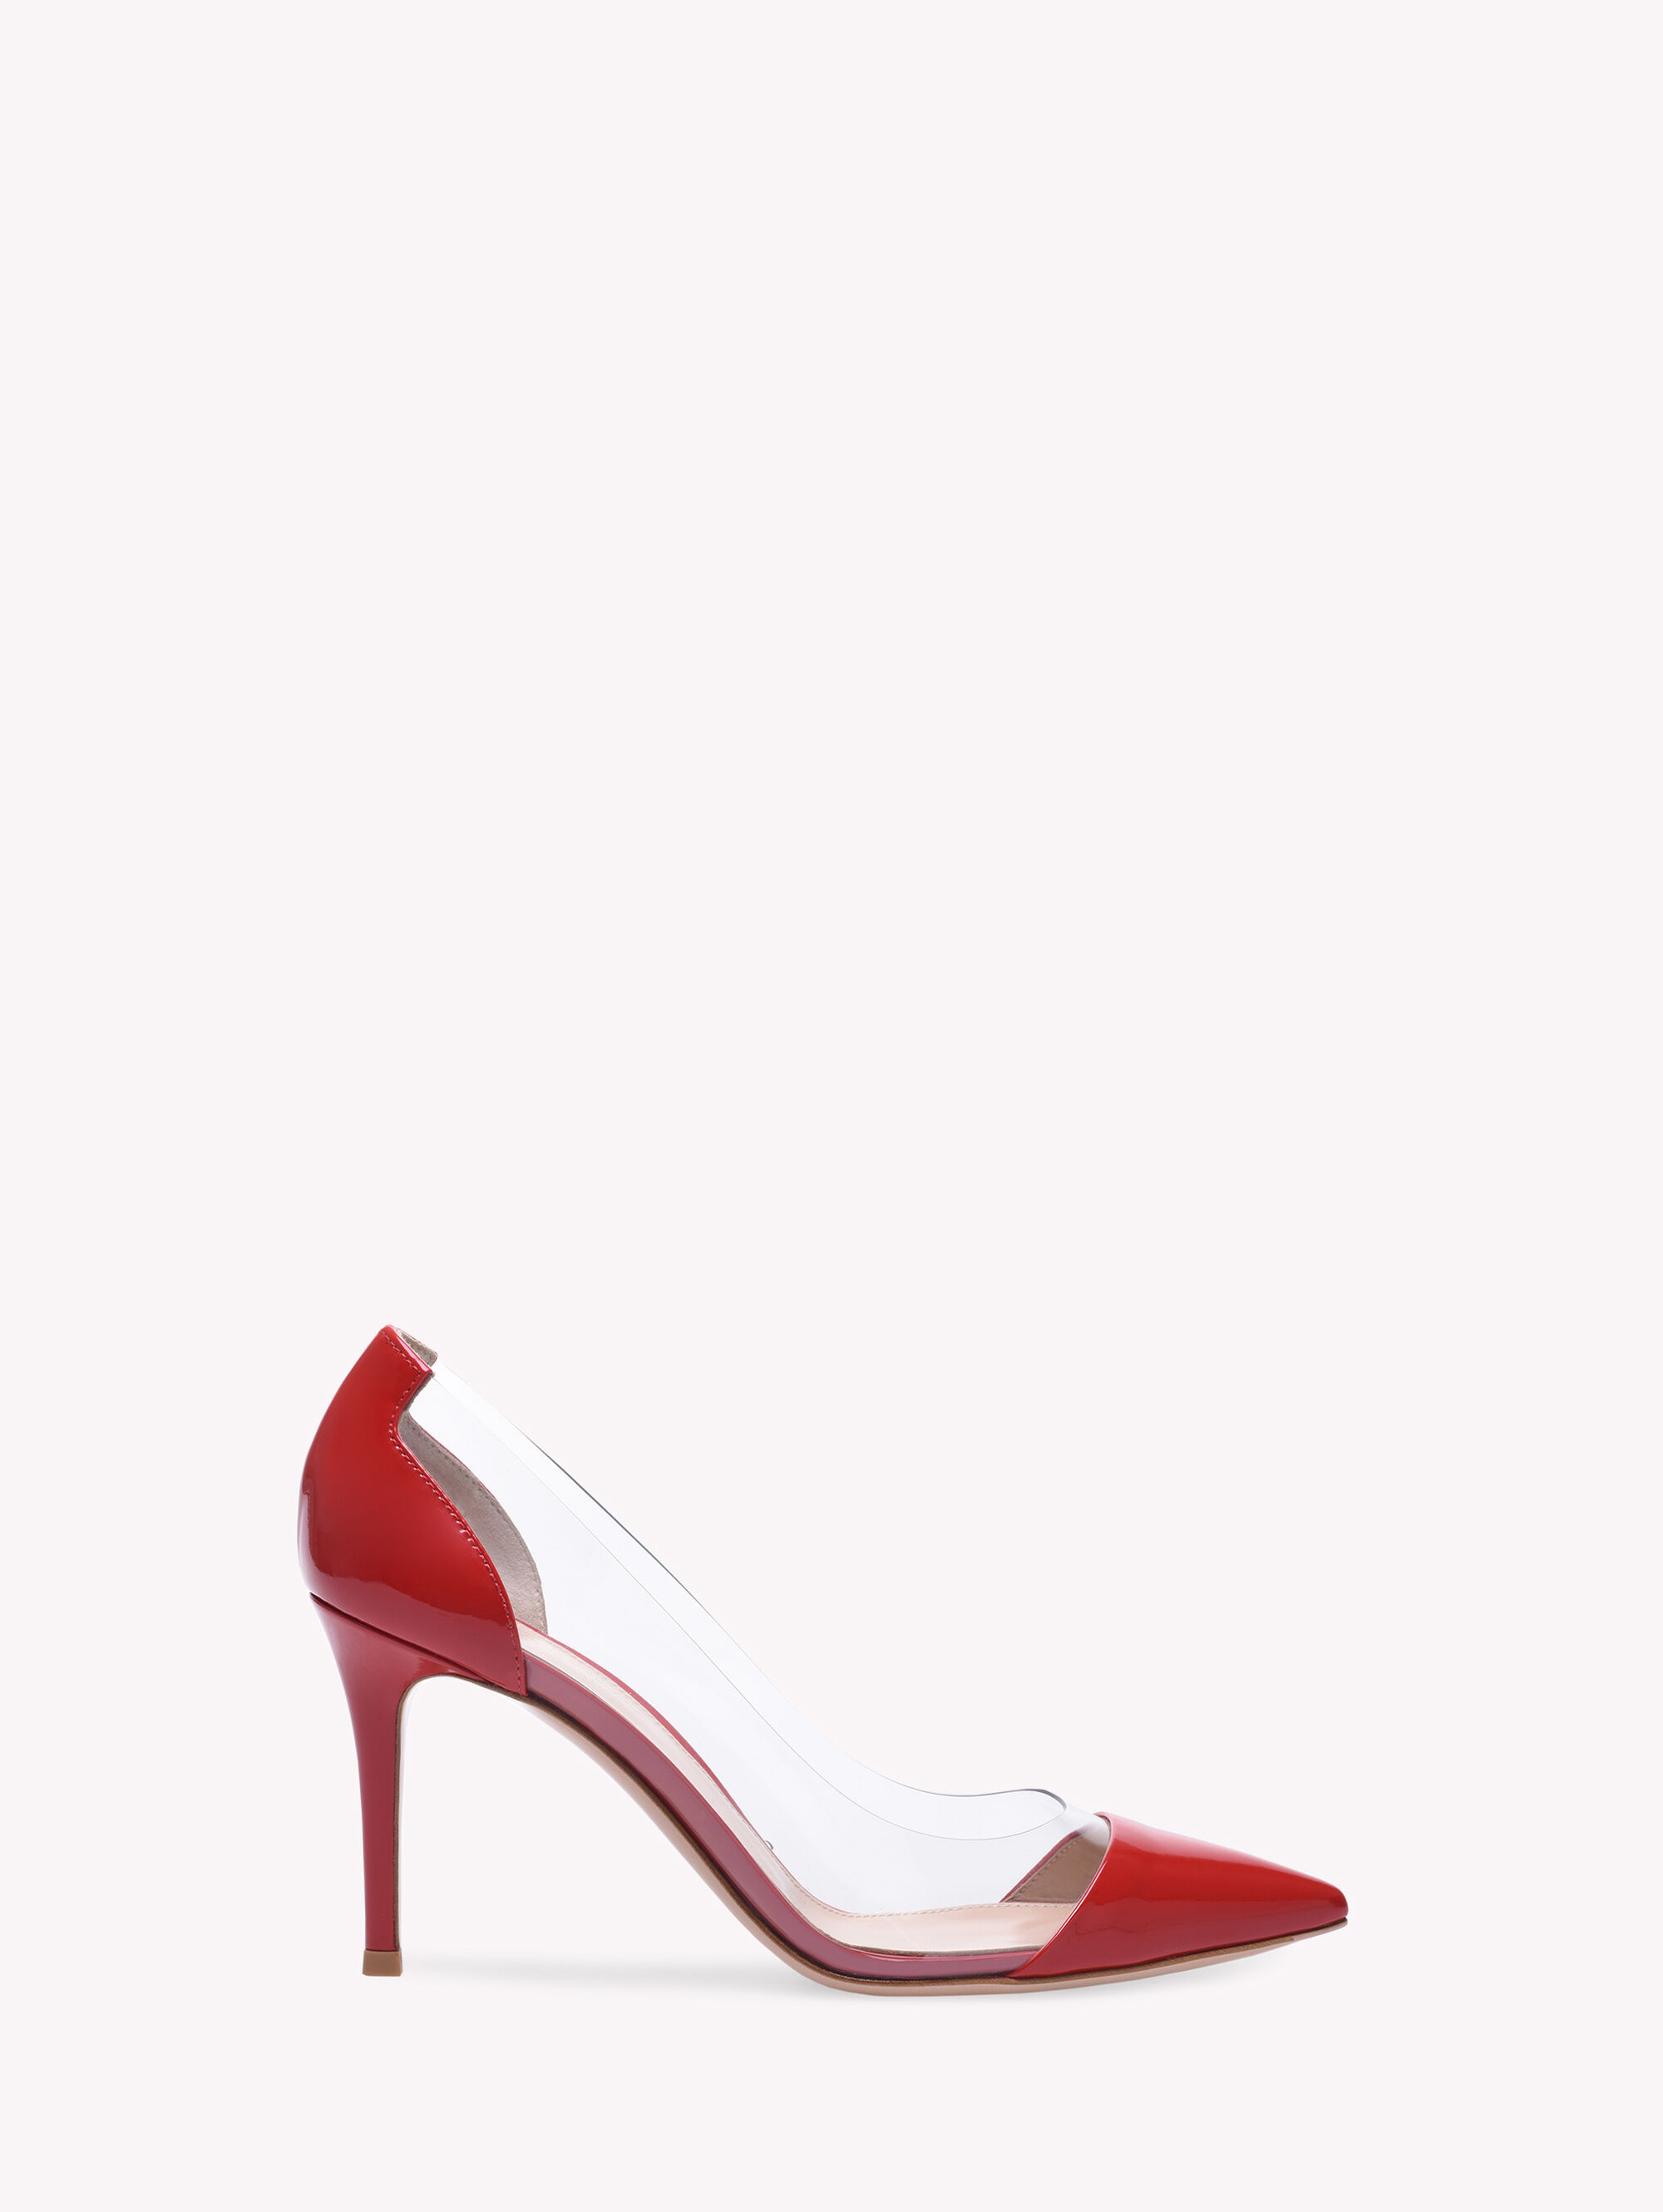 Find amazing products in レディース today | Gianvito Rossi Japan